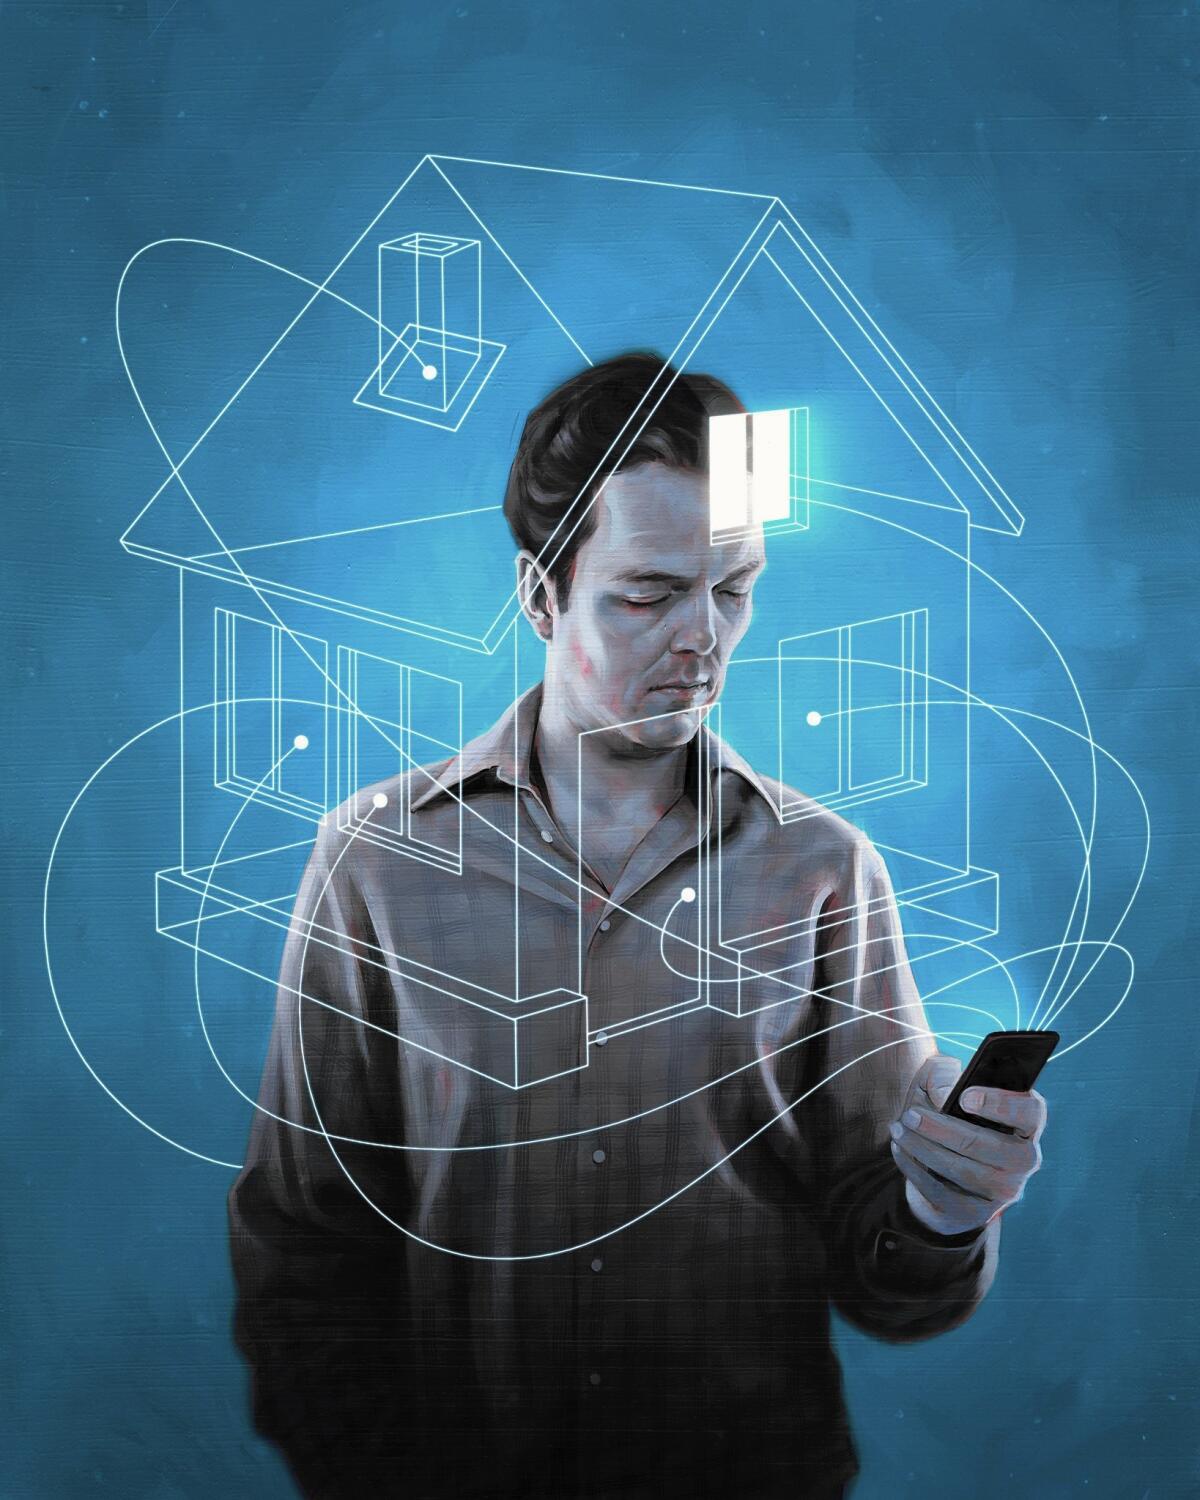 The so-called Internet of things is the topic of the moment as tech developers scramble to link nearly every household and lifestyle item to the Web.